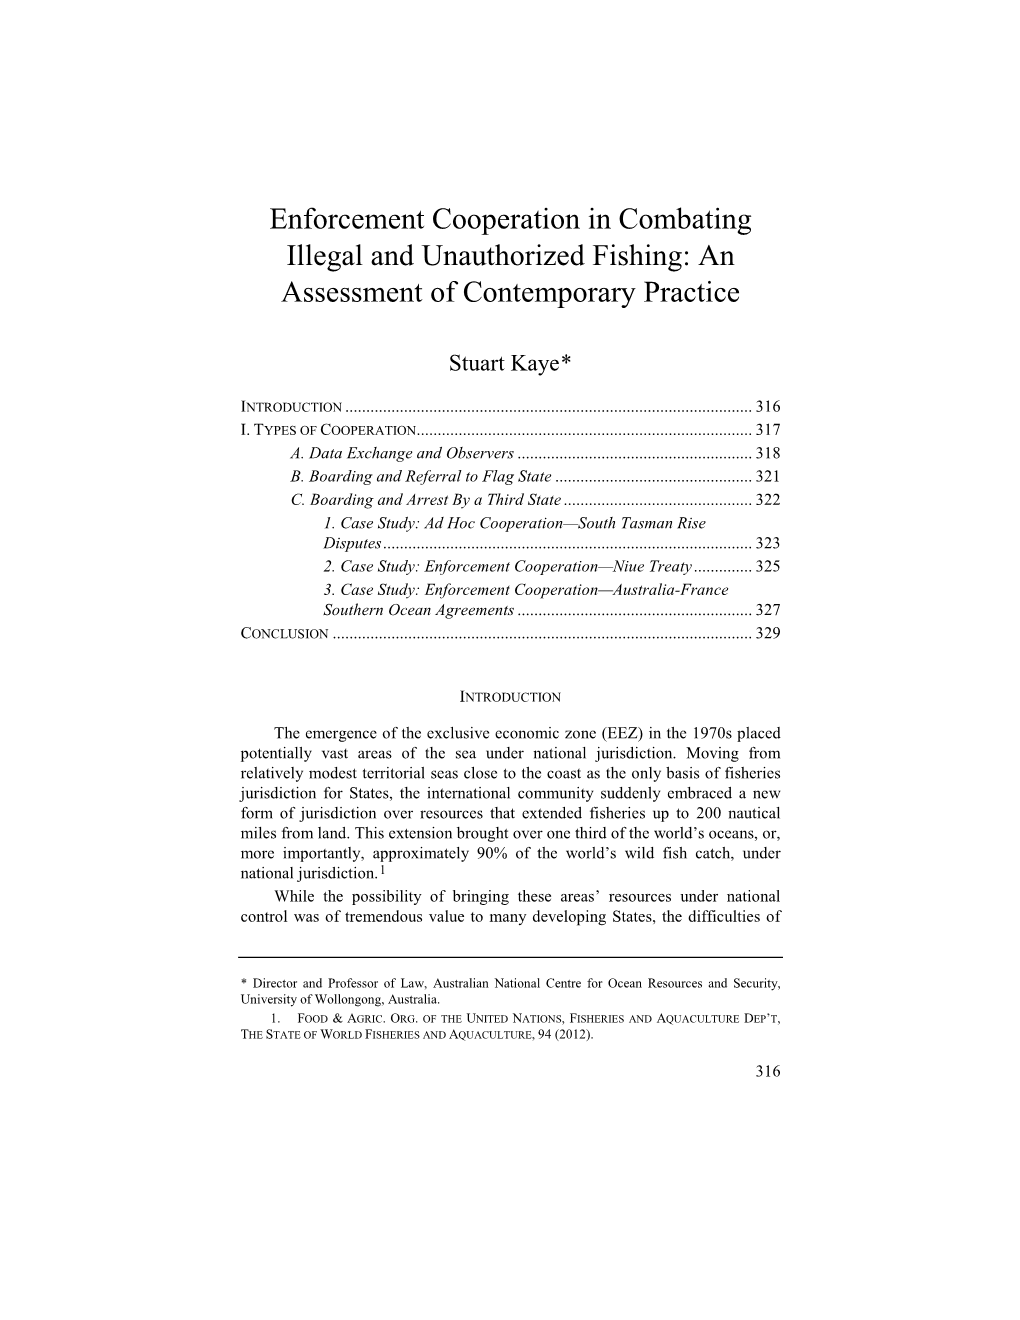 Enforcement Cooperation in Combating Illegal and Unauthorized Fishing: an Assessment of Contemporary Practice